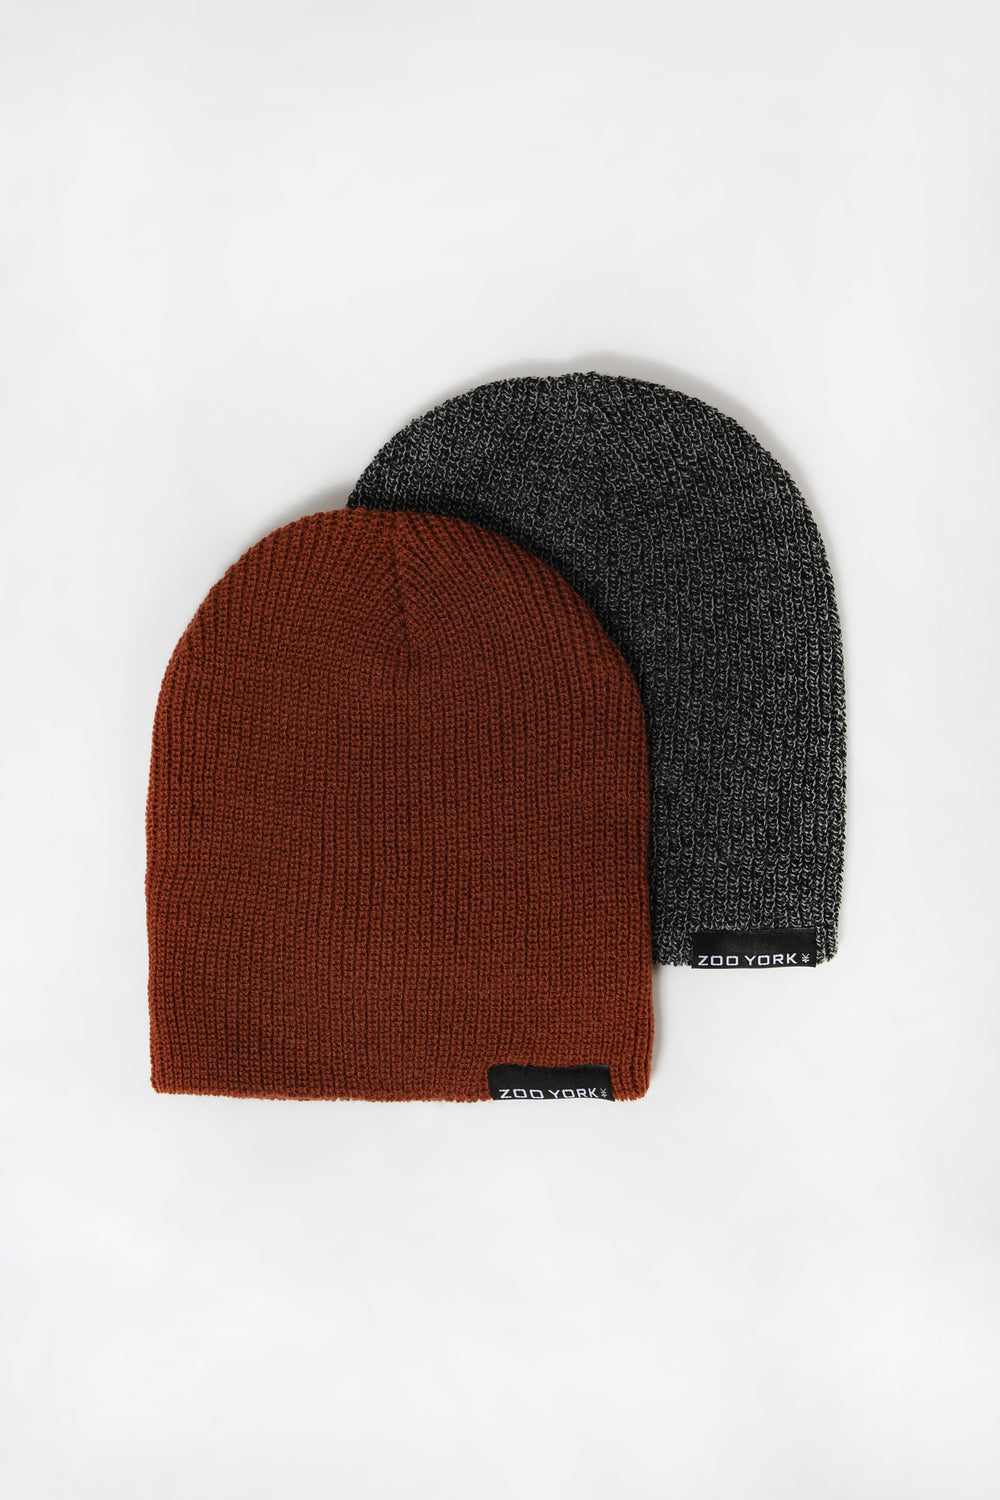 Zoo York Youth Slouch Beanie 2-Pack Tan